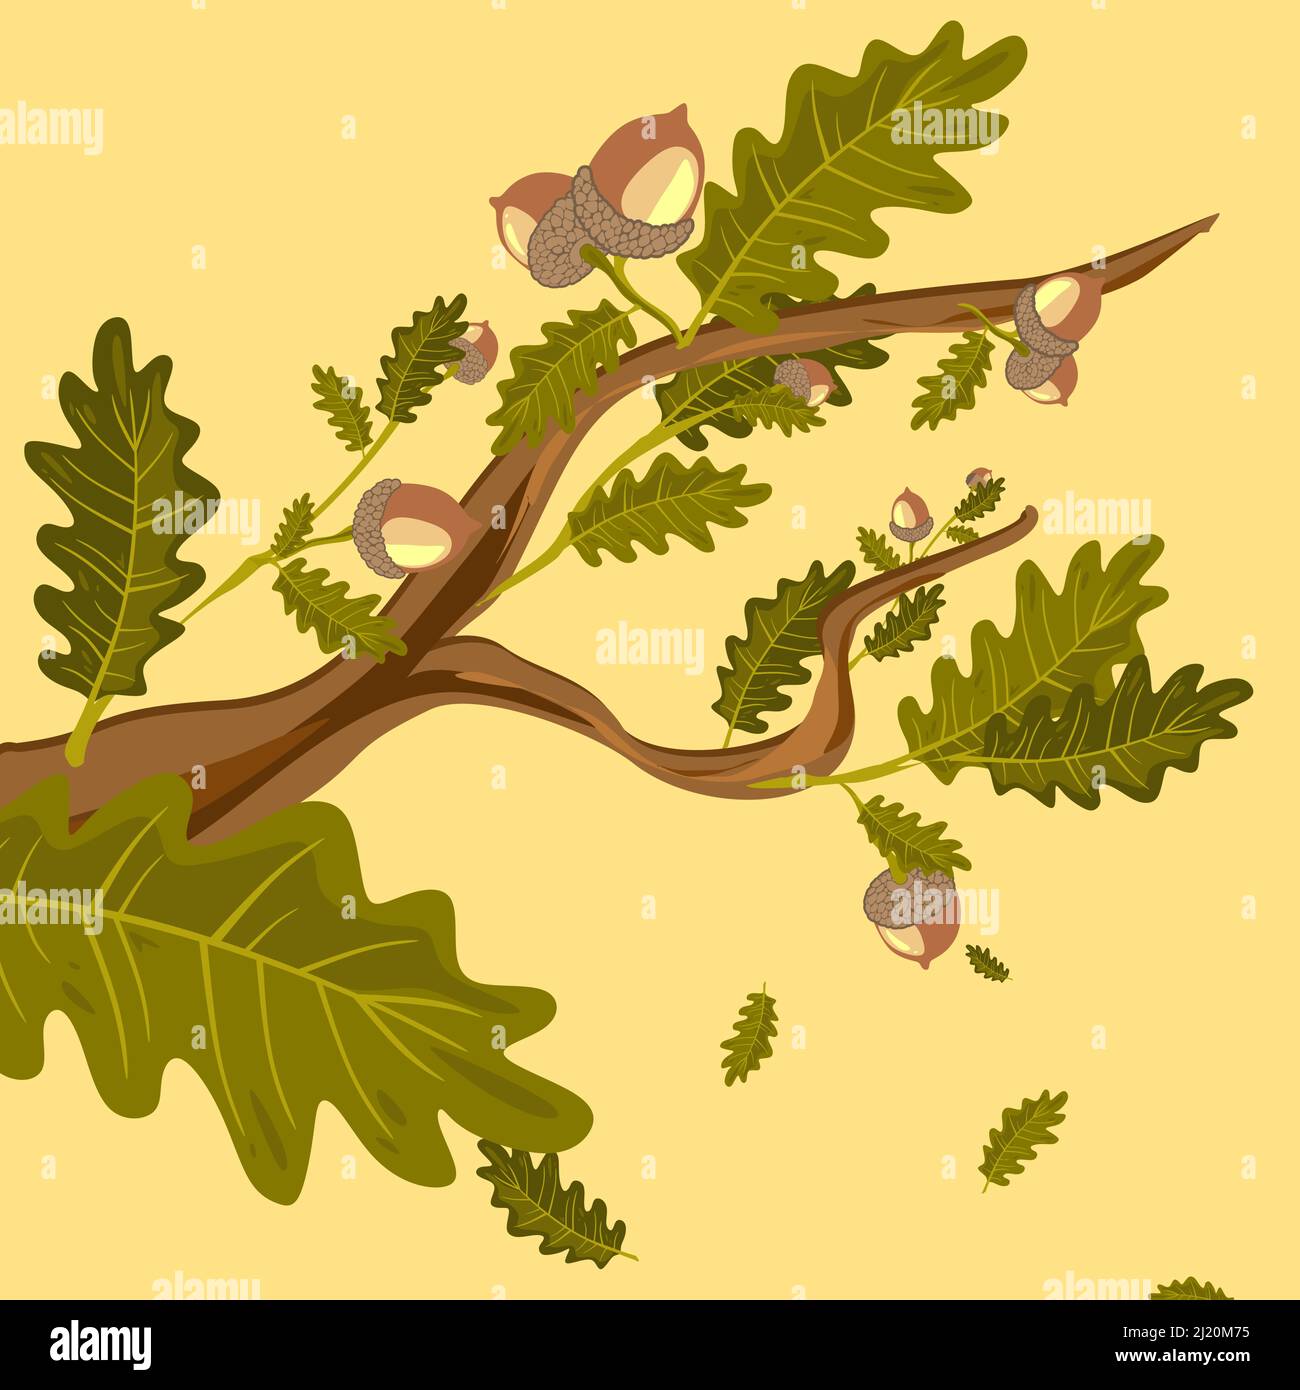 Oak branches with green leaves and acorns clipart set Stock Vector